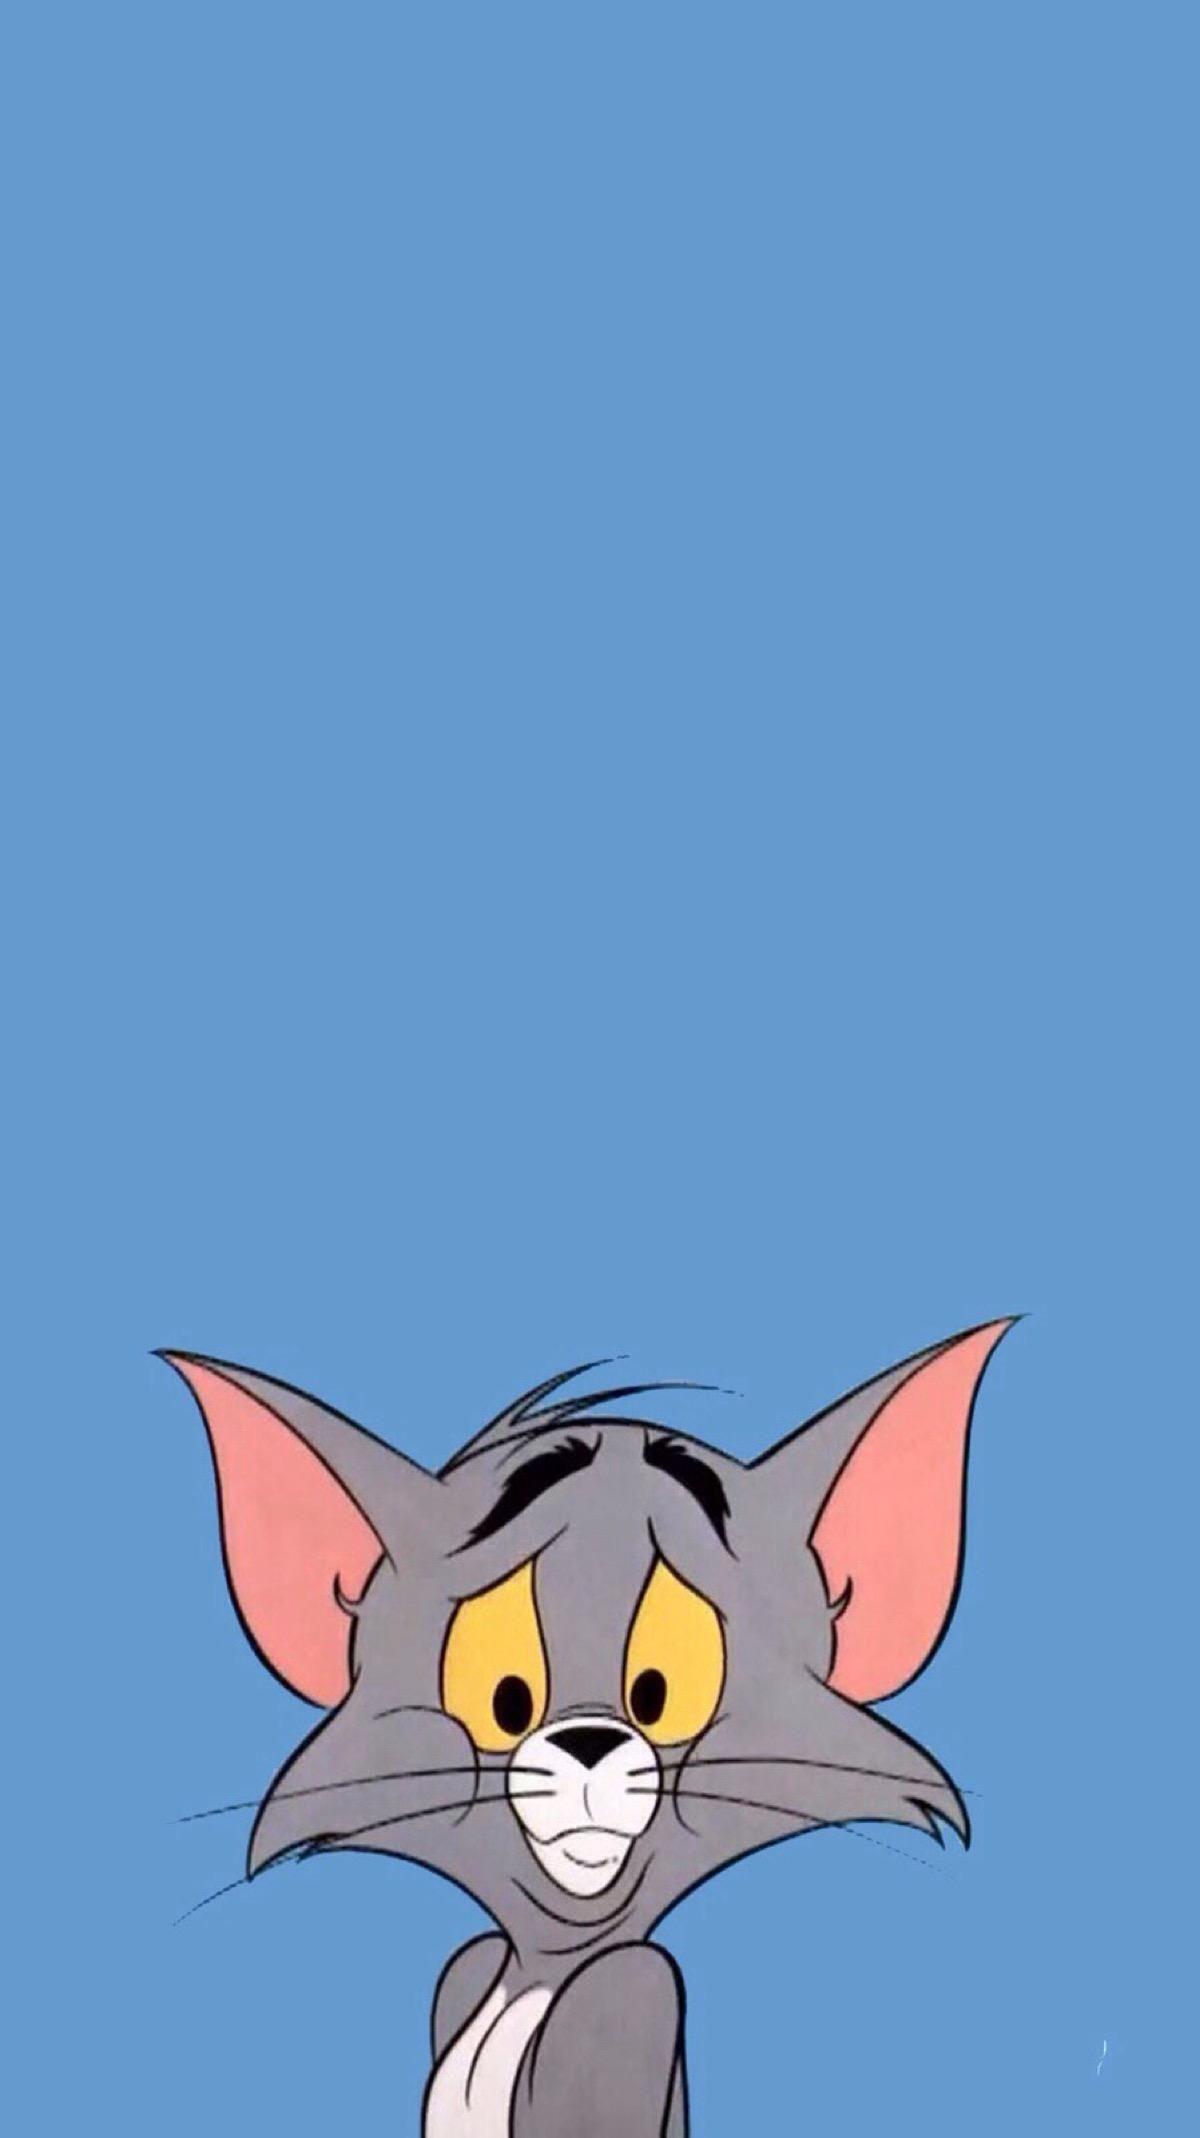 New Tom And Jerry Wallpaper HD  Wallpapers Of Tom And Jerry  Cartoon  wallpaper Cartoon wallpaper iphone Disney phone wallpaper